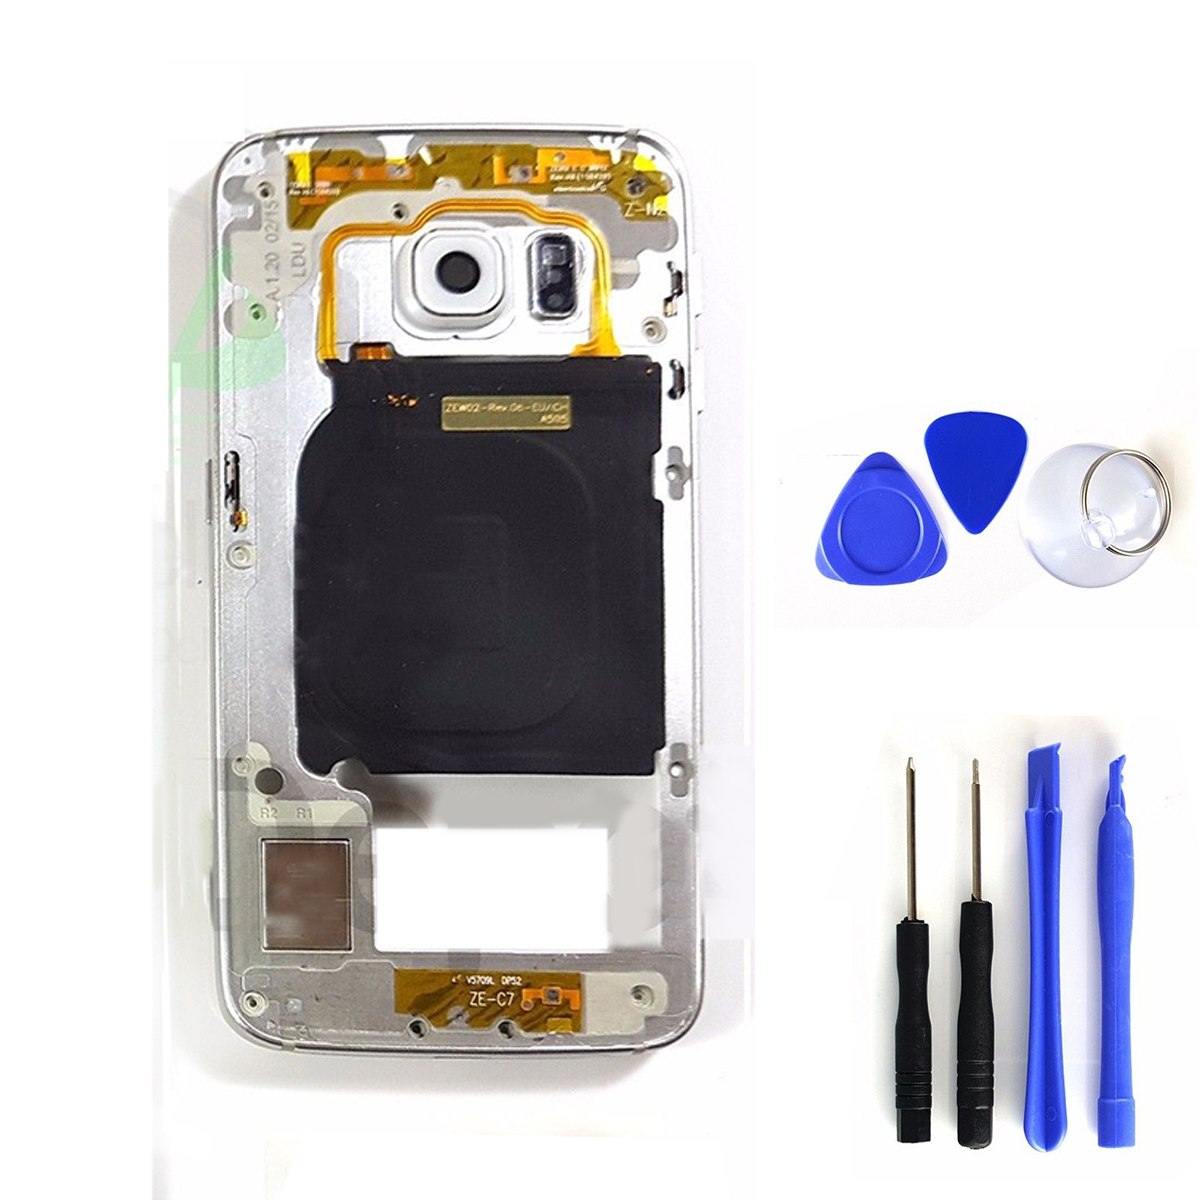 Chassis-Metal-Mid-Frame-Cover-Replacement-Assembly-for-Samsung-Galaxy-S6-Edge-1330417